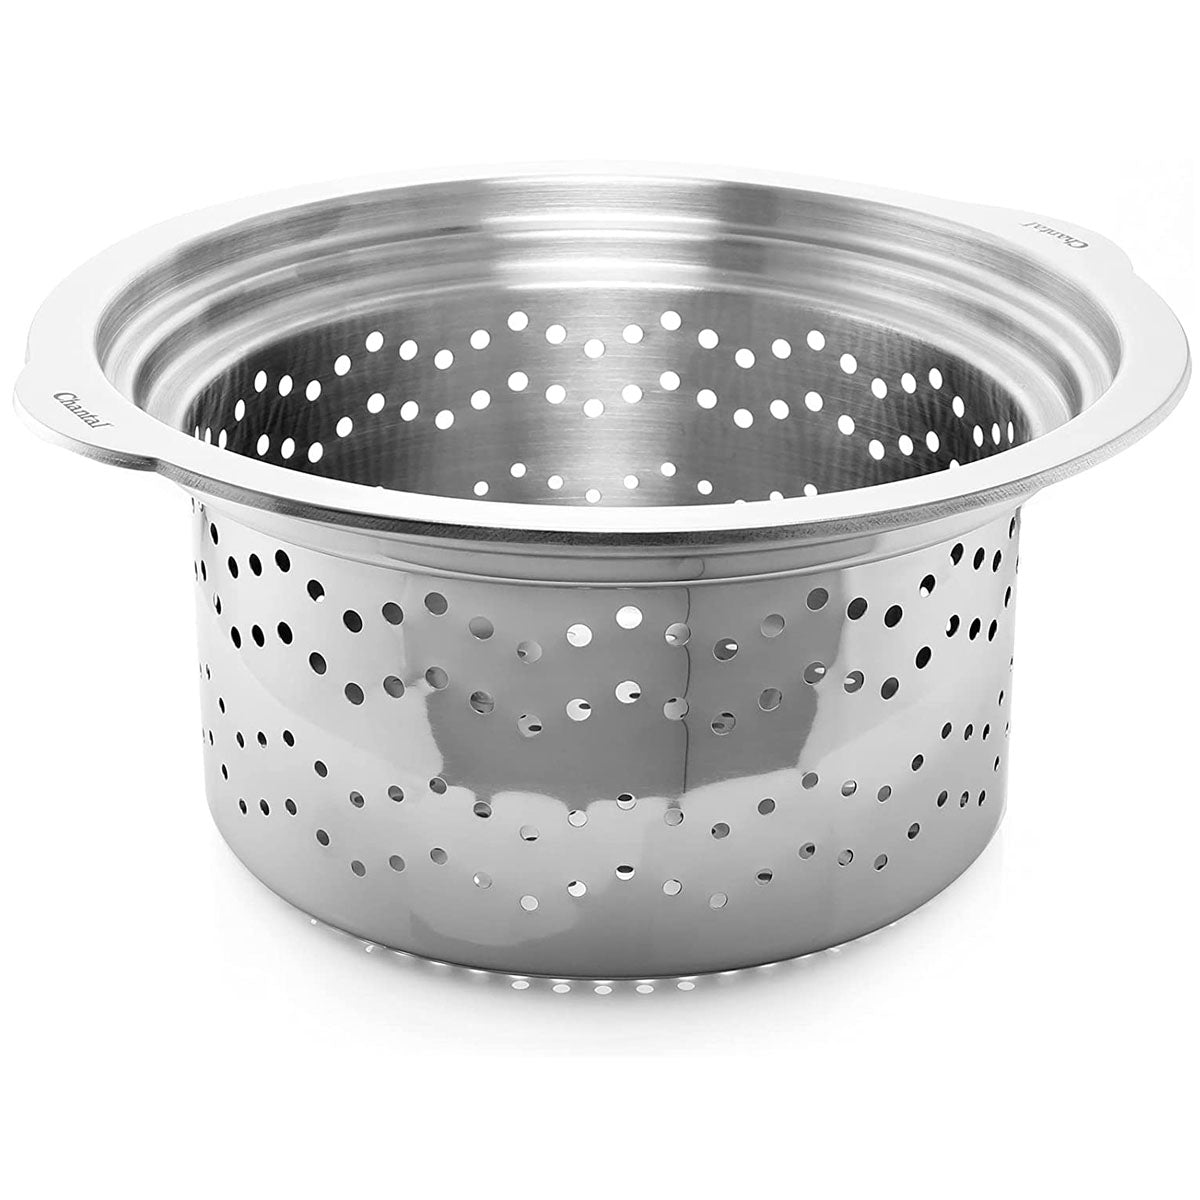 8 Quart Stainless Steel Stock Pot With Colander, Steamer, Glass